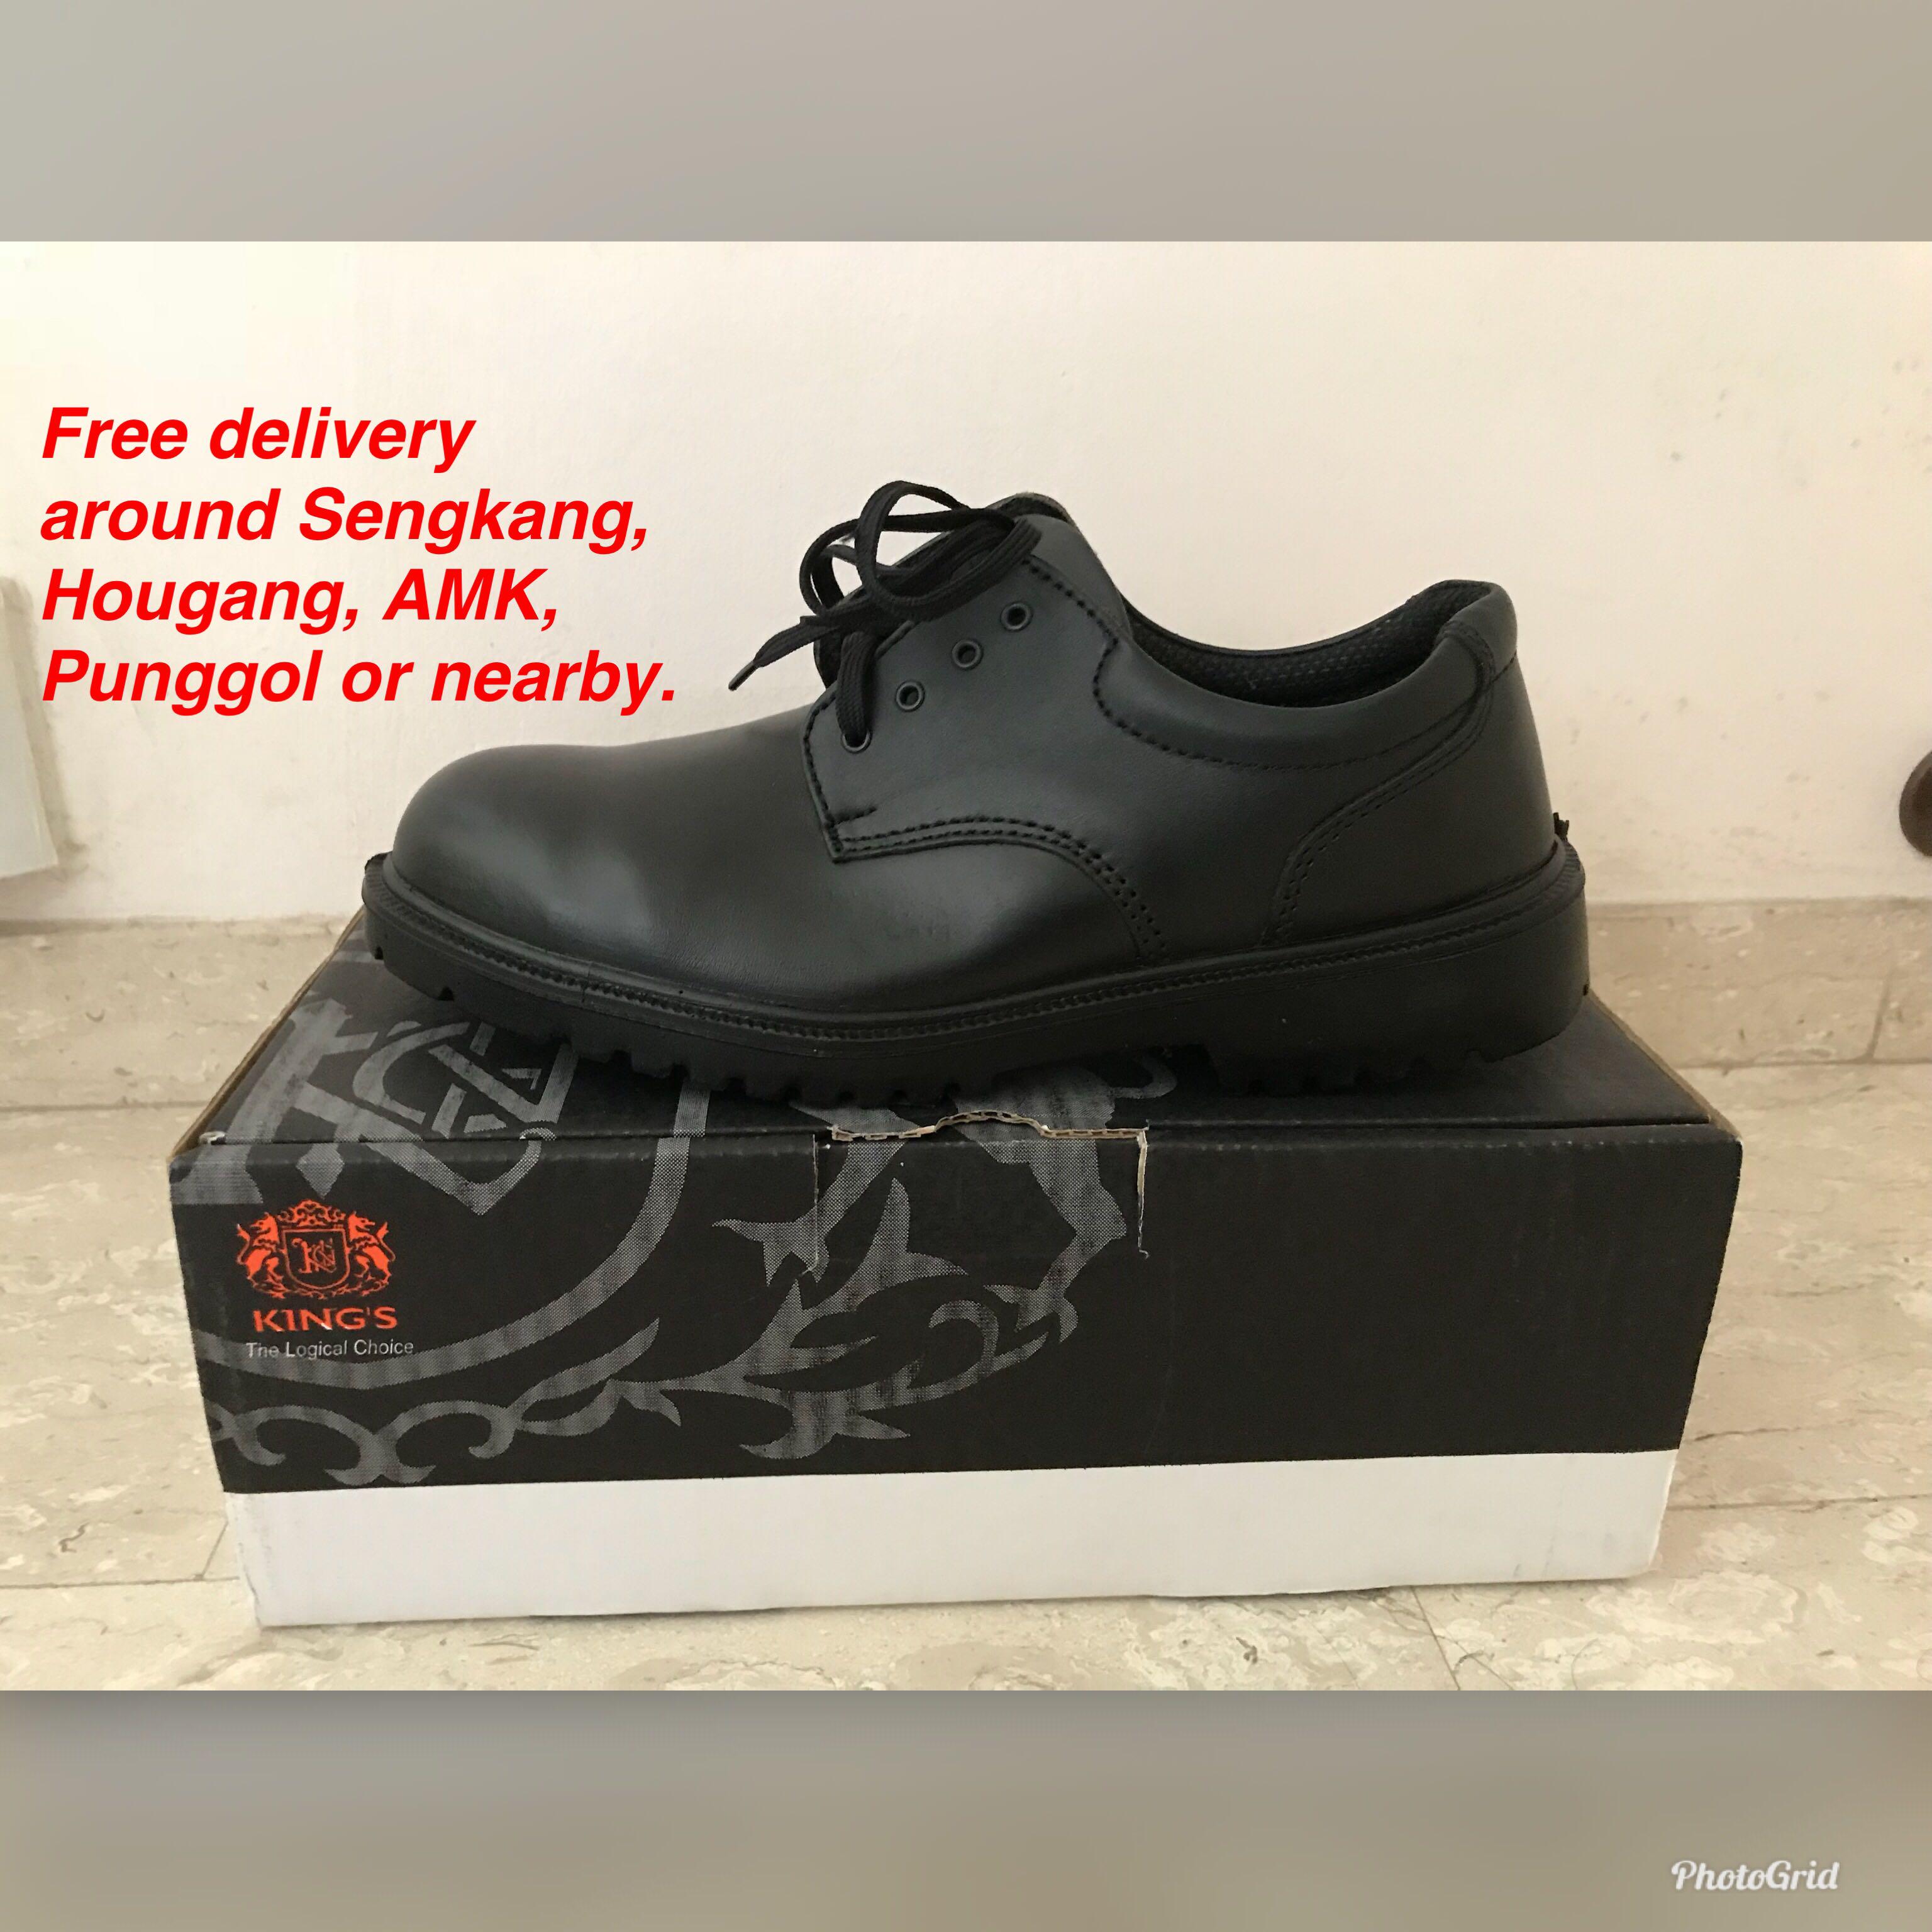 kings executive safety shoes